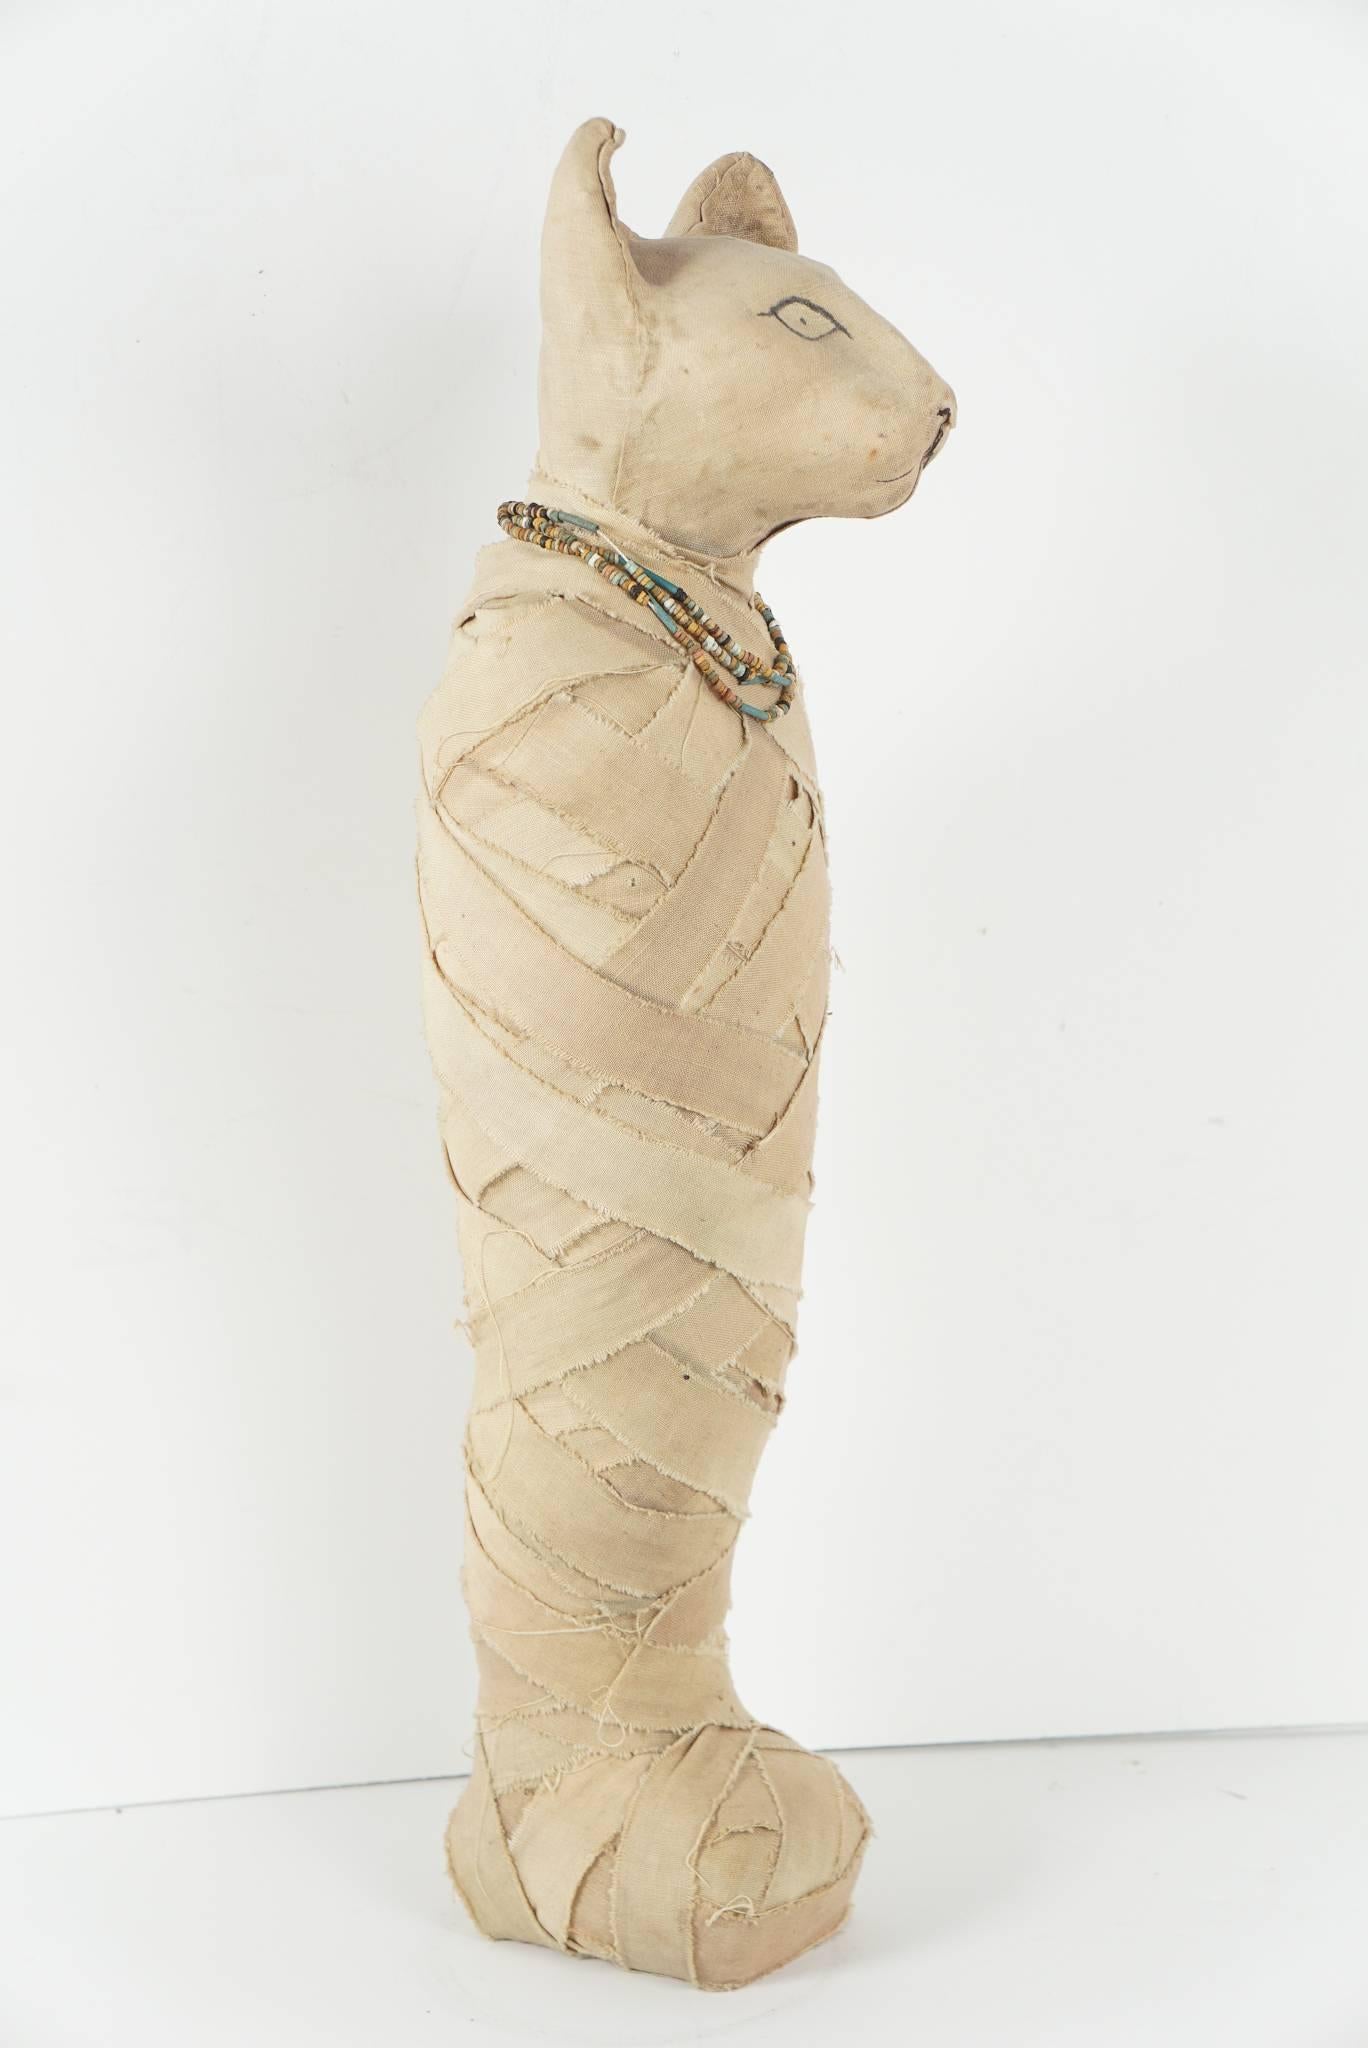 This object is made to resemble mummified cats worshiped as gods and ambassadors from the underworld. Made in Egypt to sell to the tourist trade but not made as an intended fake antiquity this item is a rare survivor from at least 100 years ago and